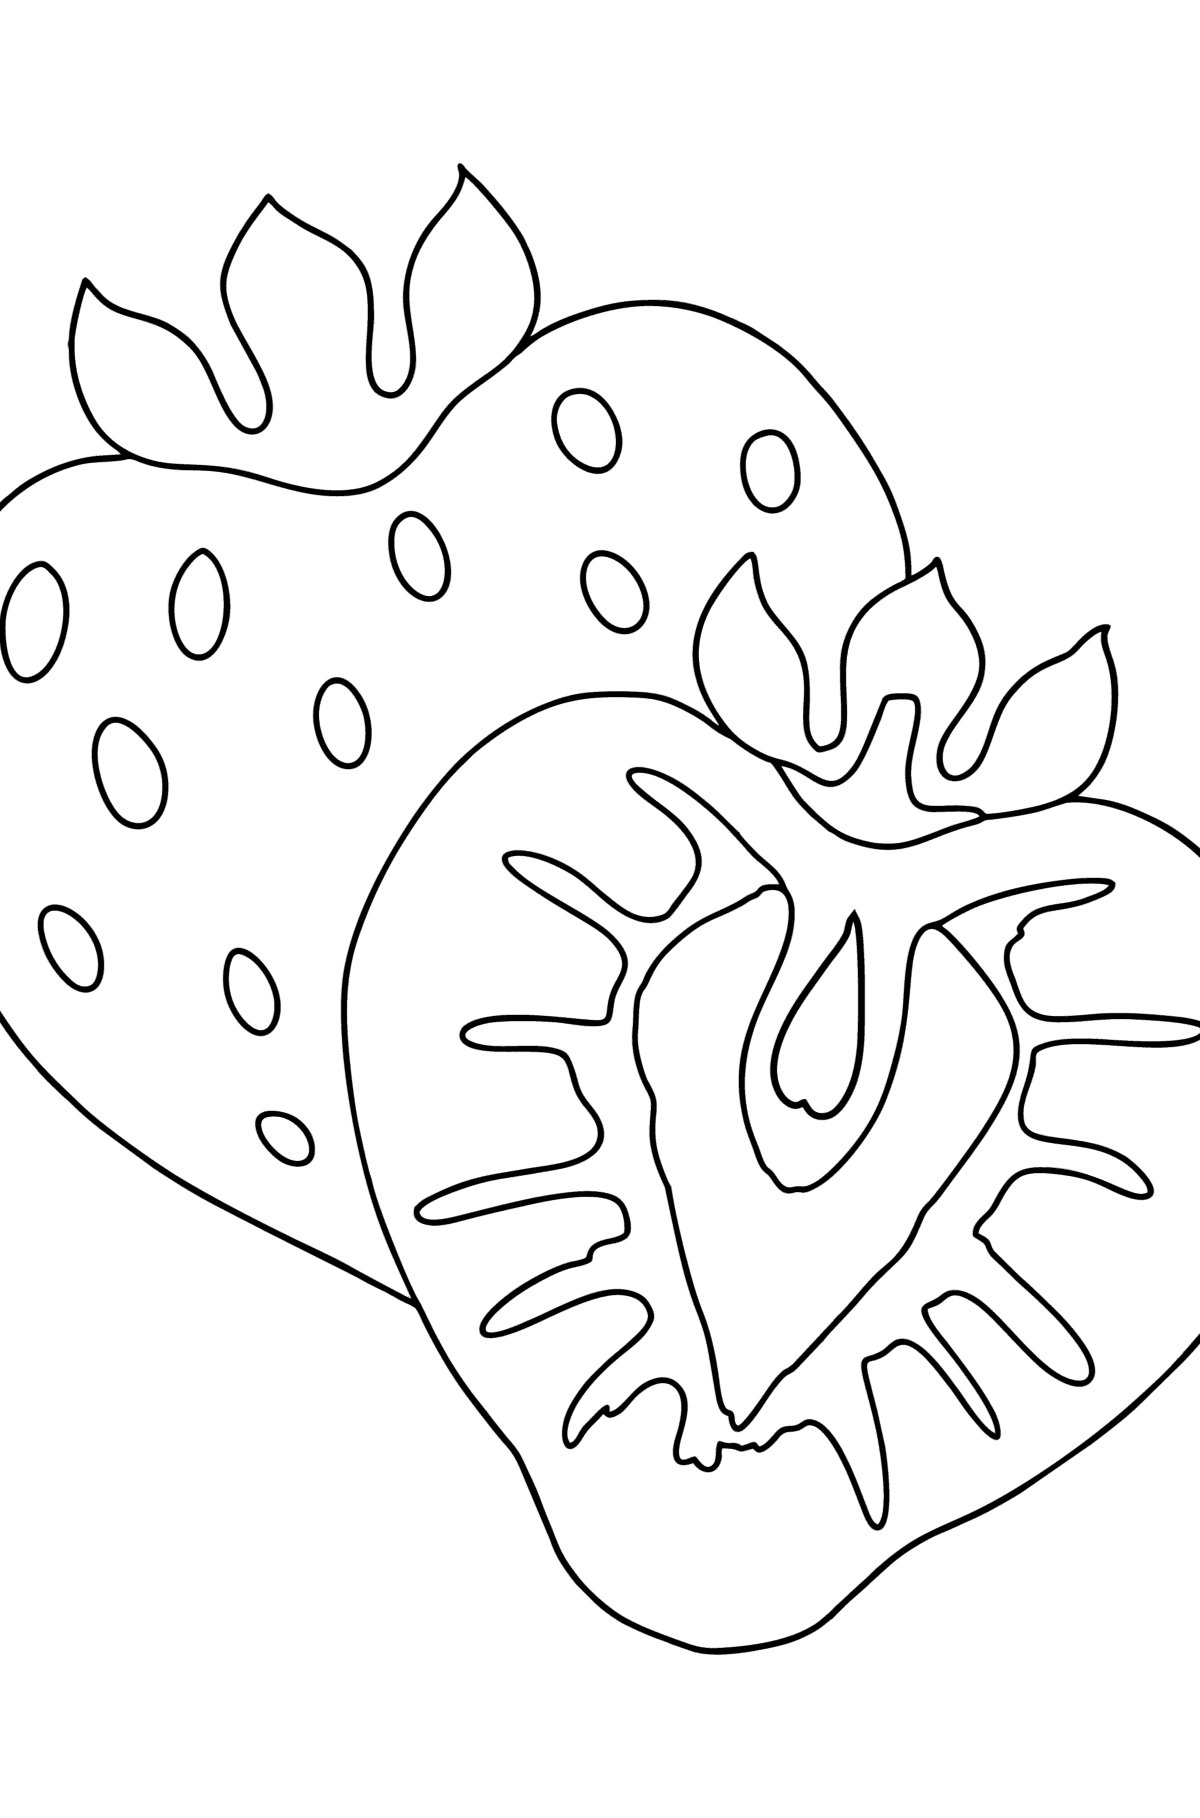 Delicious strawberries сoloring page - Coloring Pages for Kids